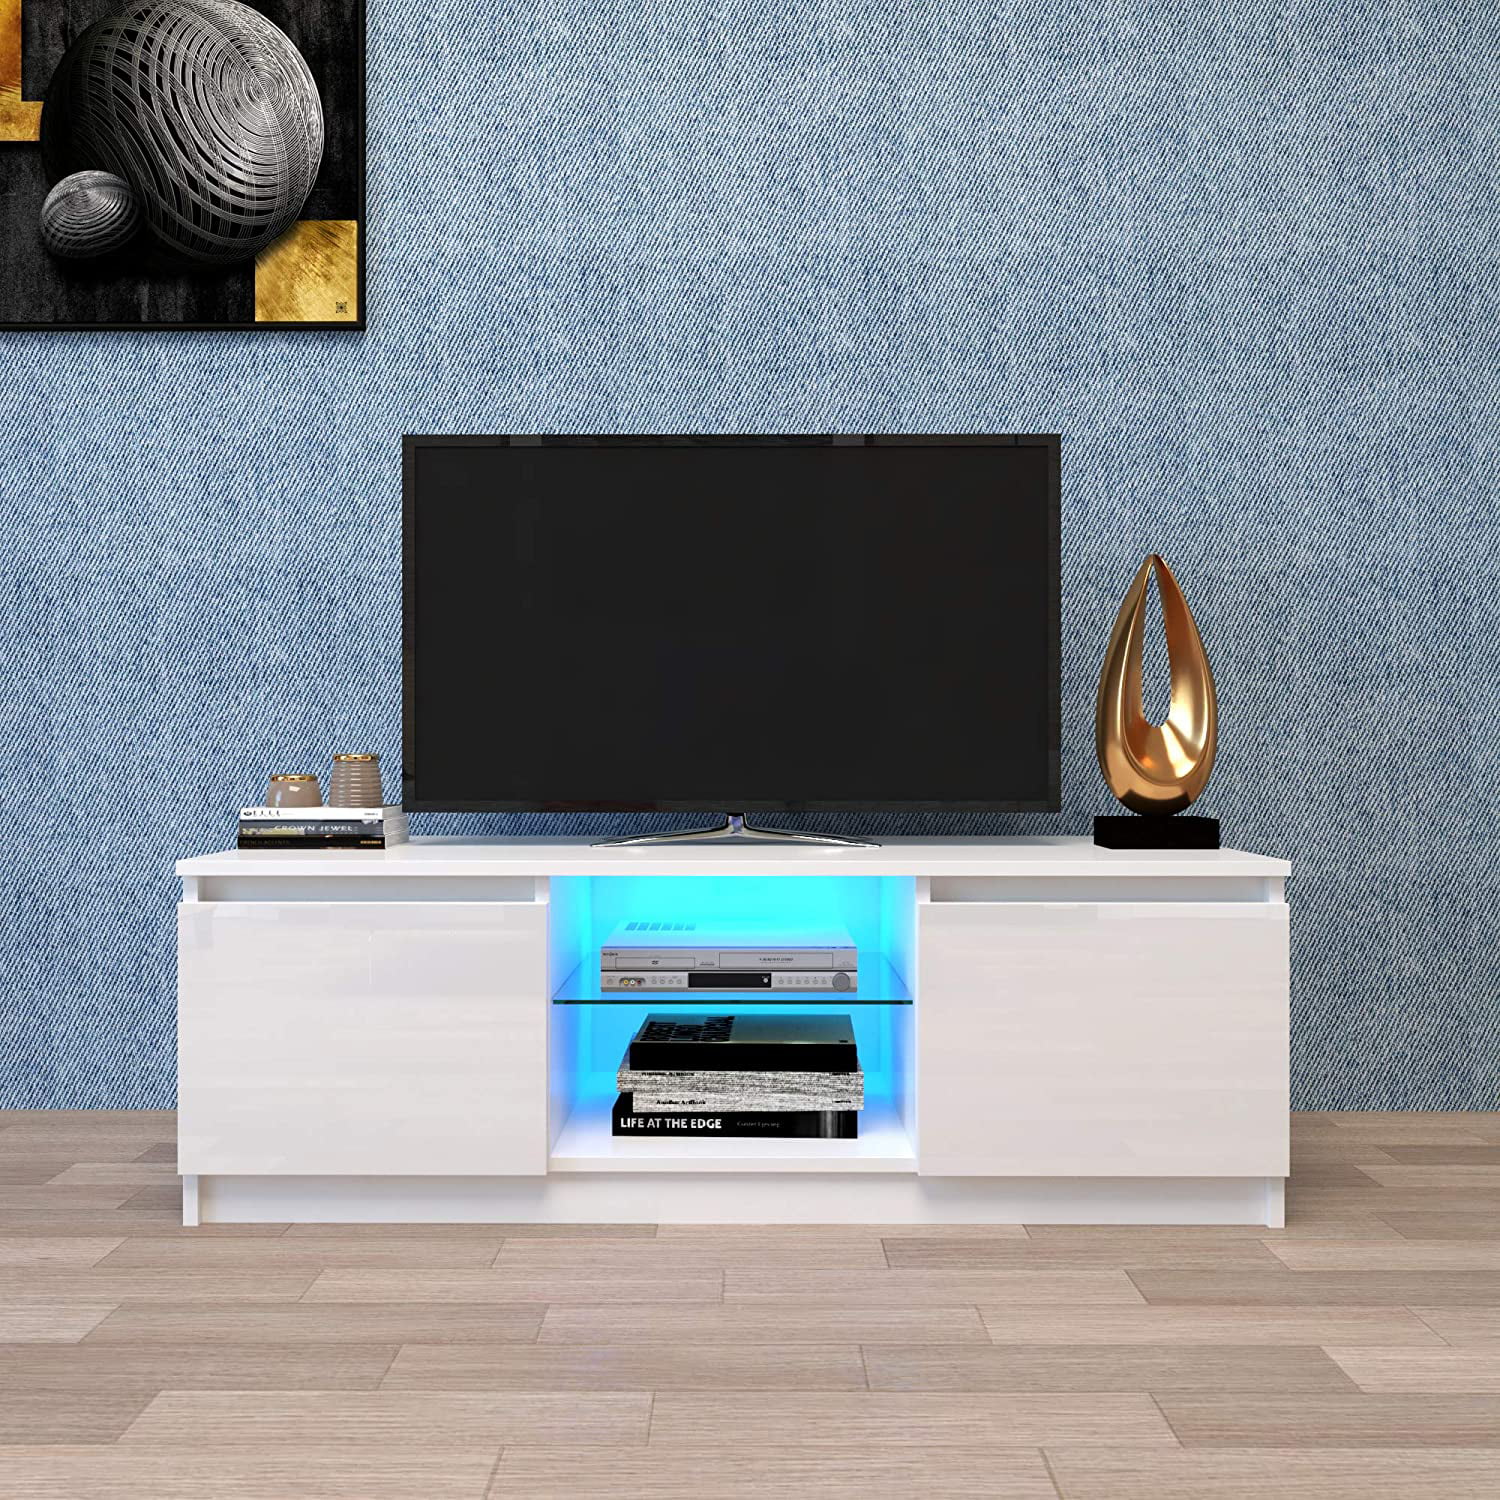 Details about   TV Stand Entertainment Center Media Console Furniture Wood Storage Cabinet 